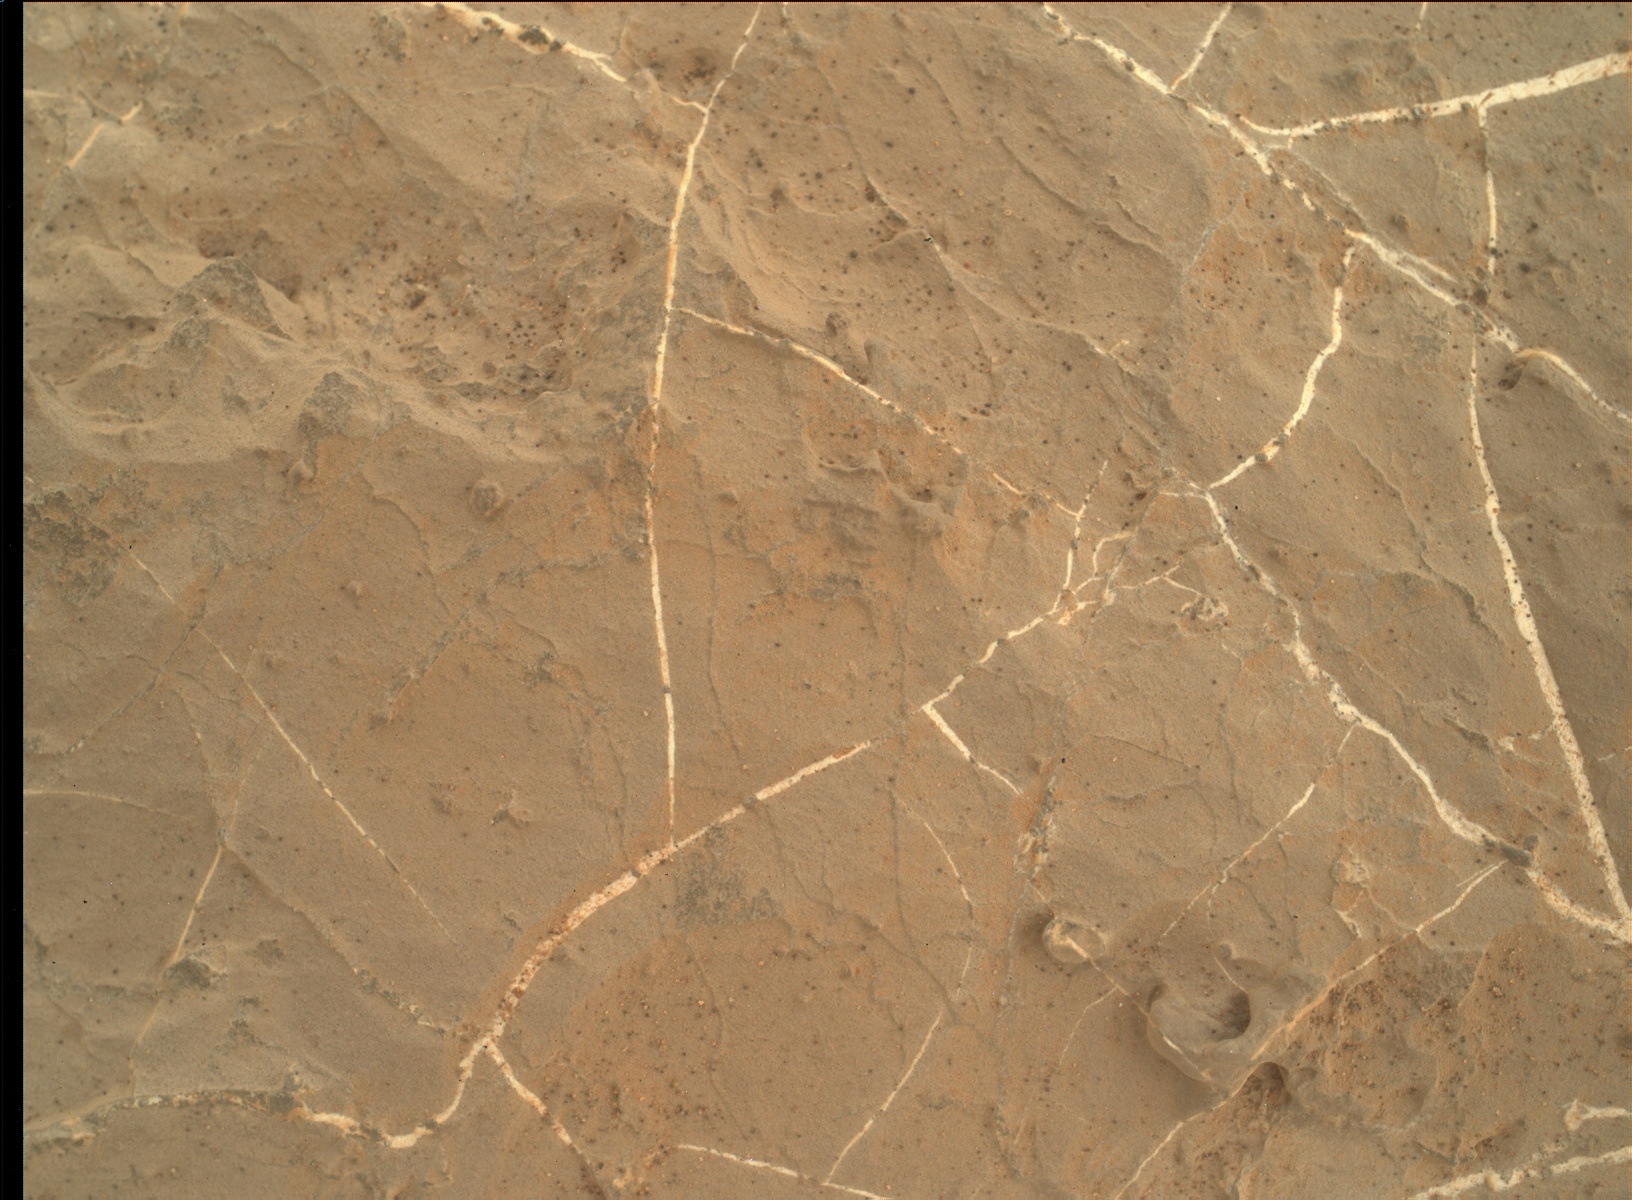 Nasa's Mars rover Curiosity acquired this image using its Mars Hand Lens Imager (MAHLI) on Sol 2224